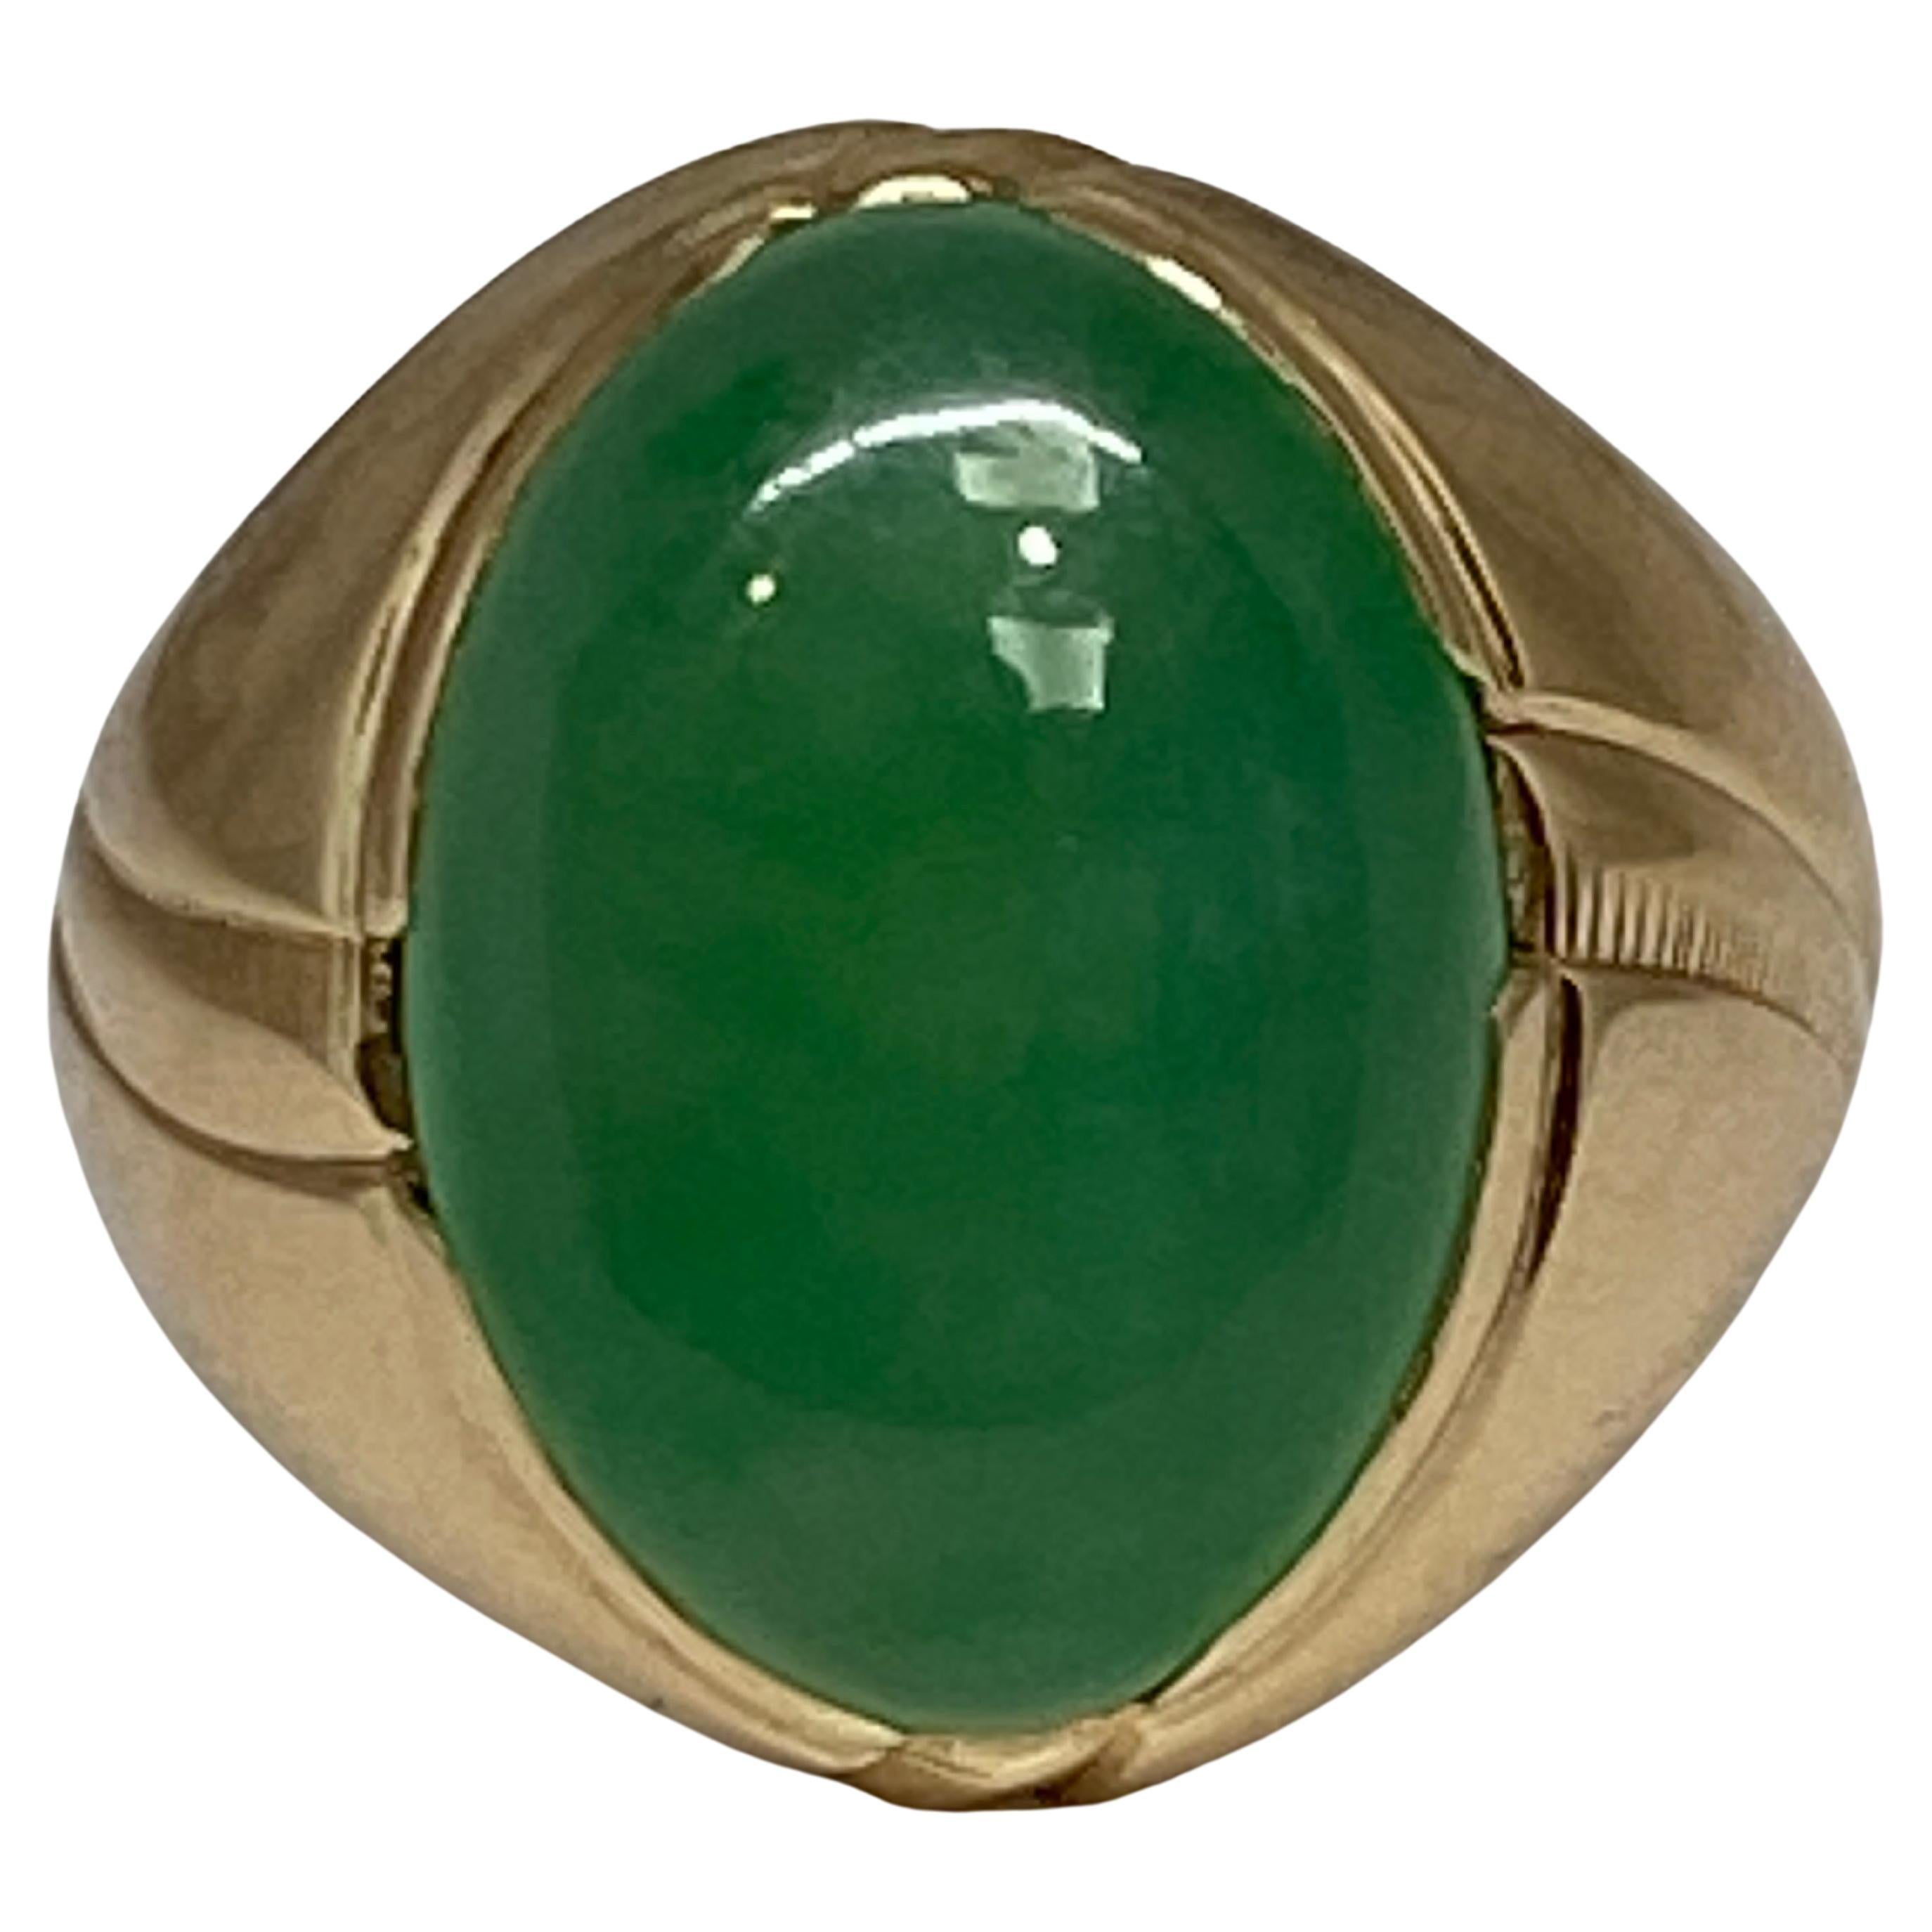 This retro era bold and substantial ring presents a glorious natural green jade cabochon at the center. 

Smooth and glossy, the sizable cabochon shows off its bright vibrant green color vertically atop a gleaming 14K rosy - yellow gold mounting